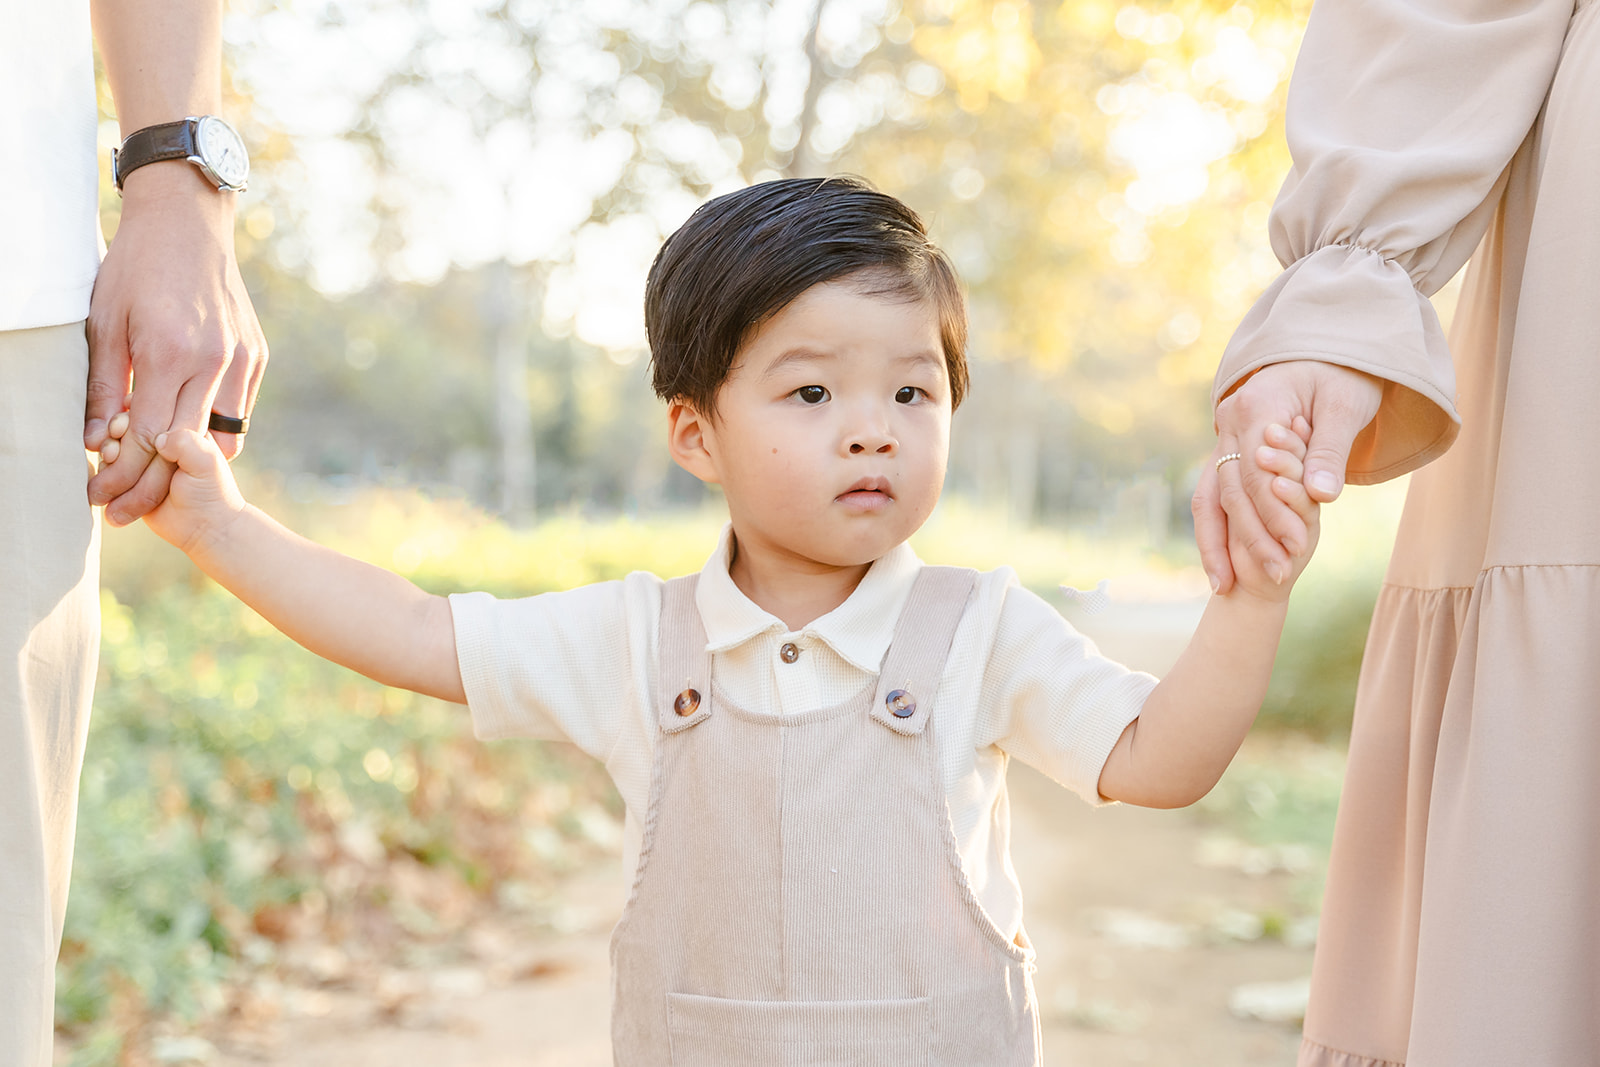 A young boy in brown overalls walks through a park holding hands with mom and dad after attending Preschool in Irvine